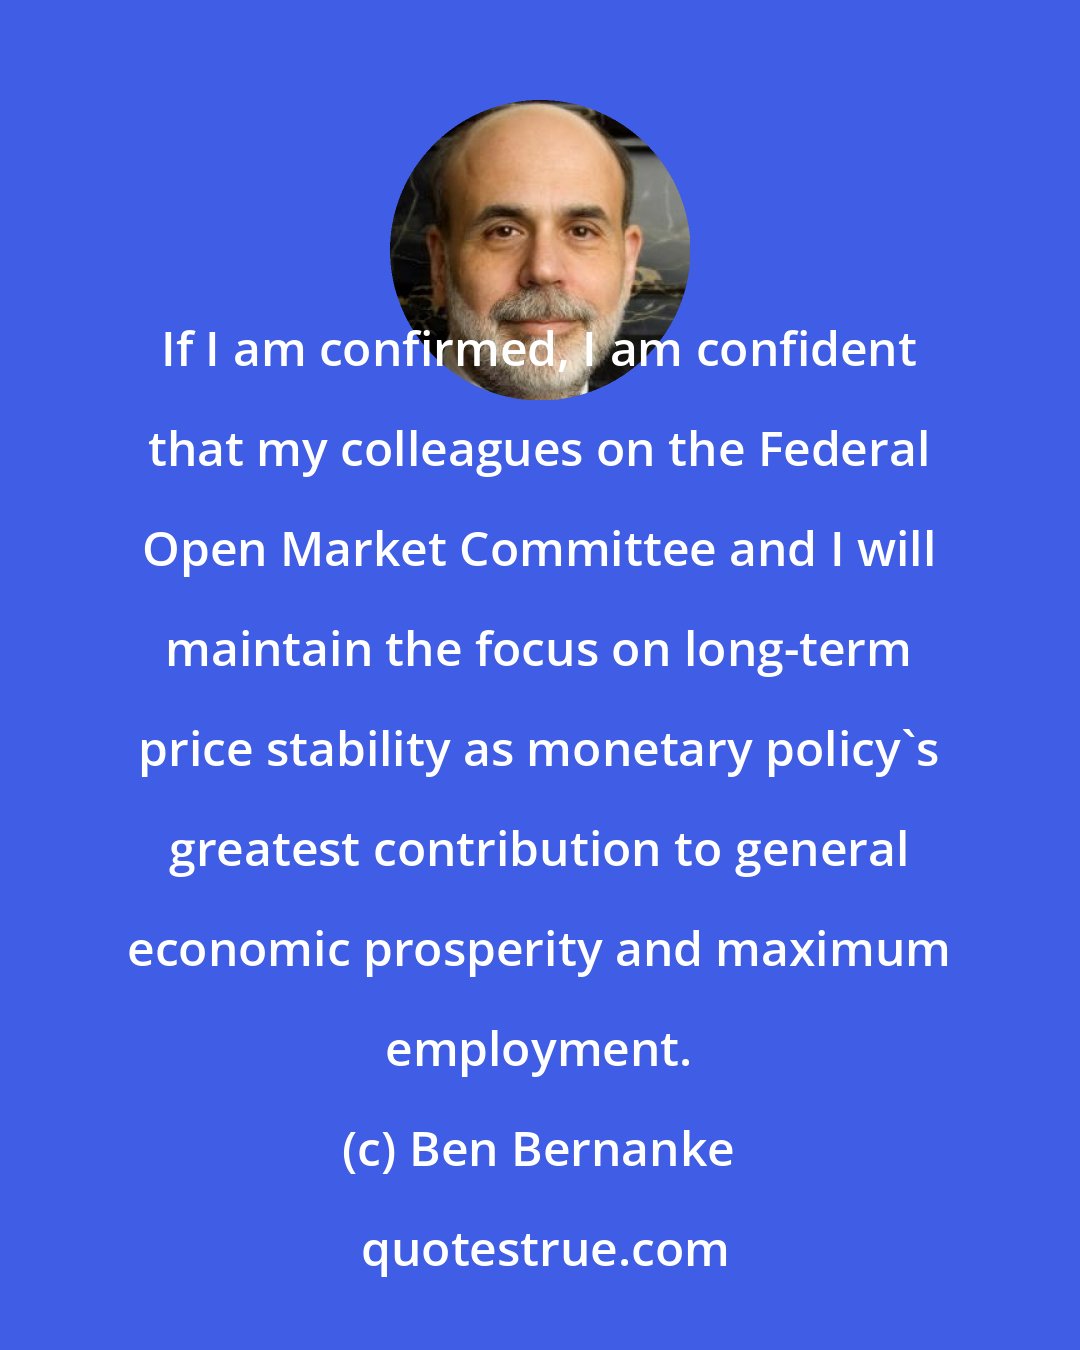 Ben Bernanke: If I am confirmed, I am confident that my colleagues on the Federal Open Market Committee and I will maintain the focus on long-term price stability as monetary policy's greatest contribution to general economic prosperity and maximum employment.